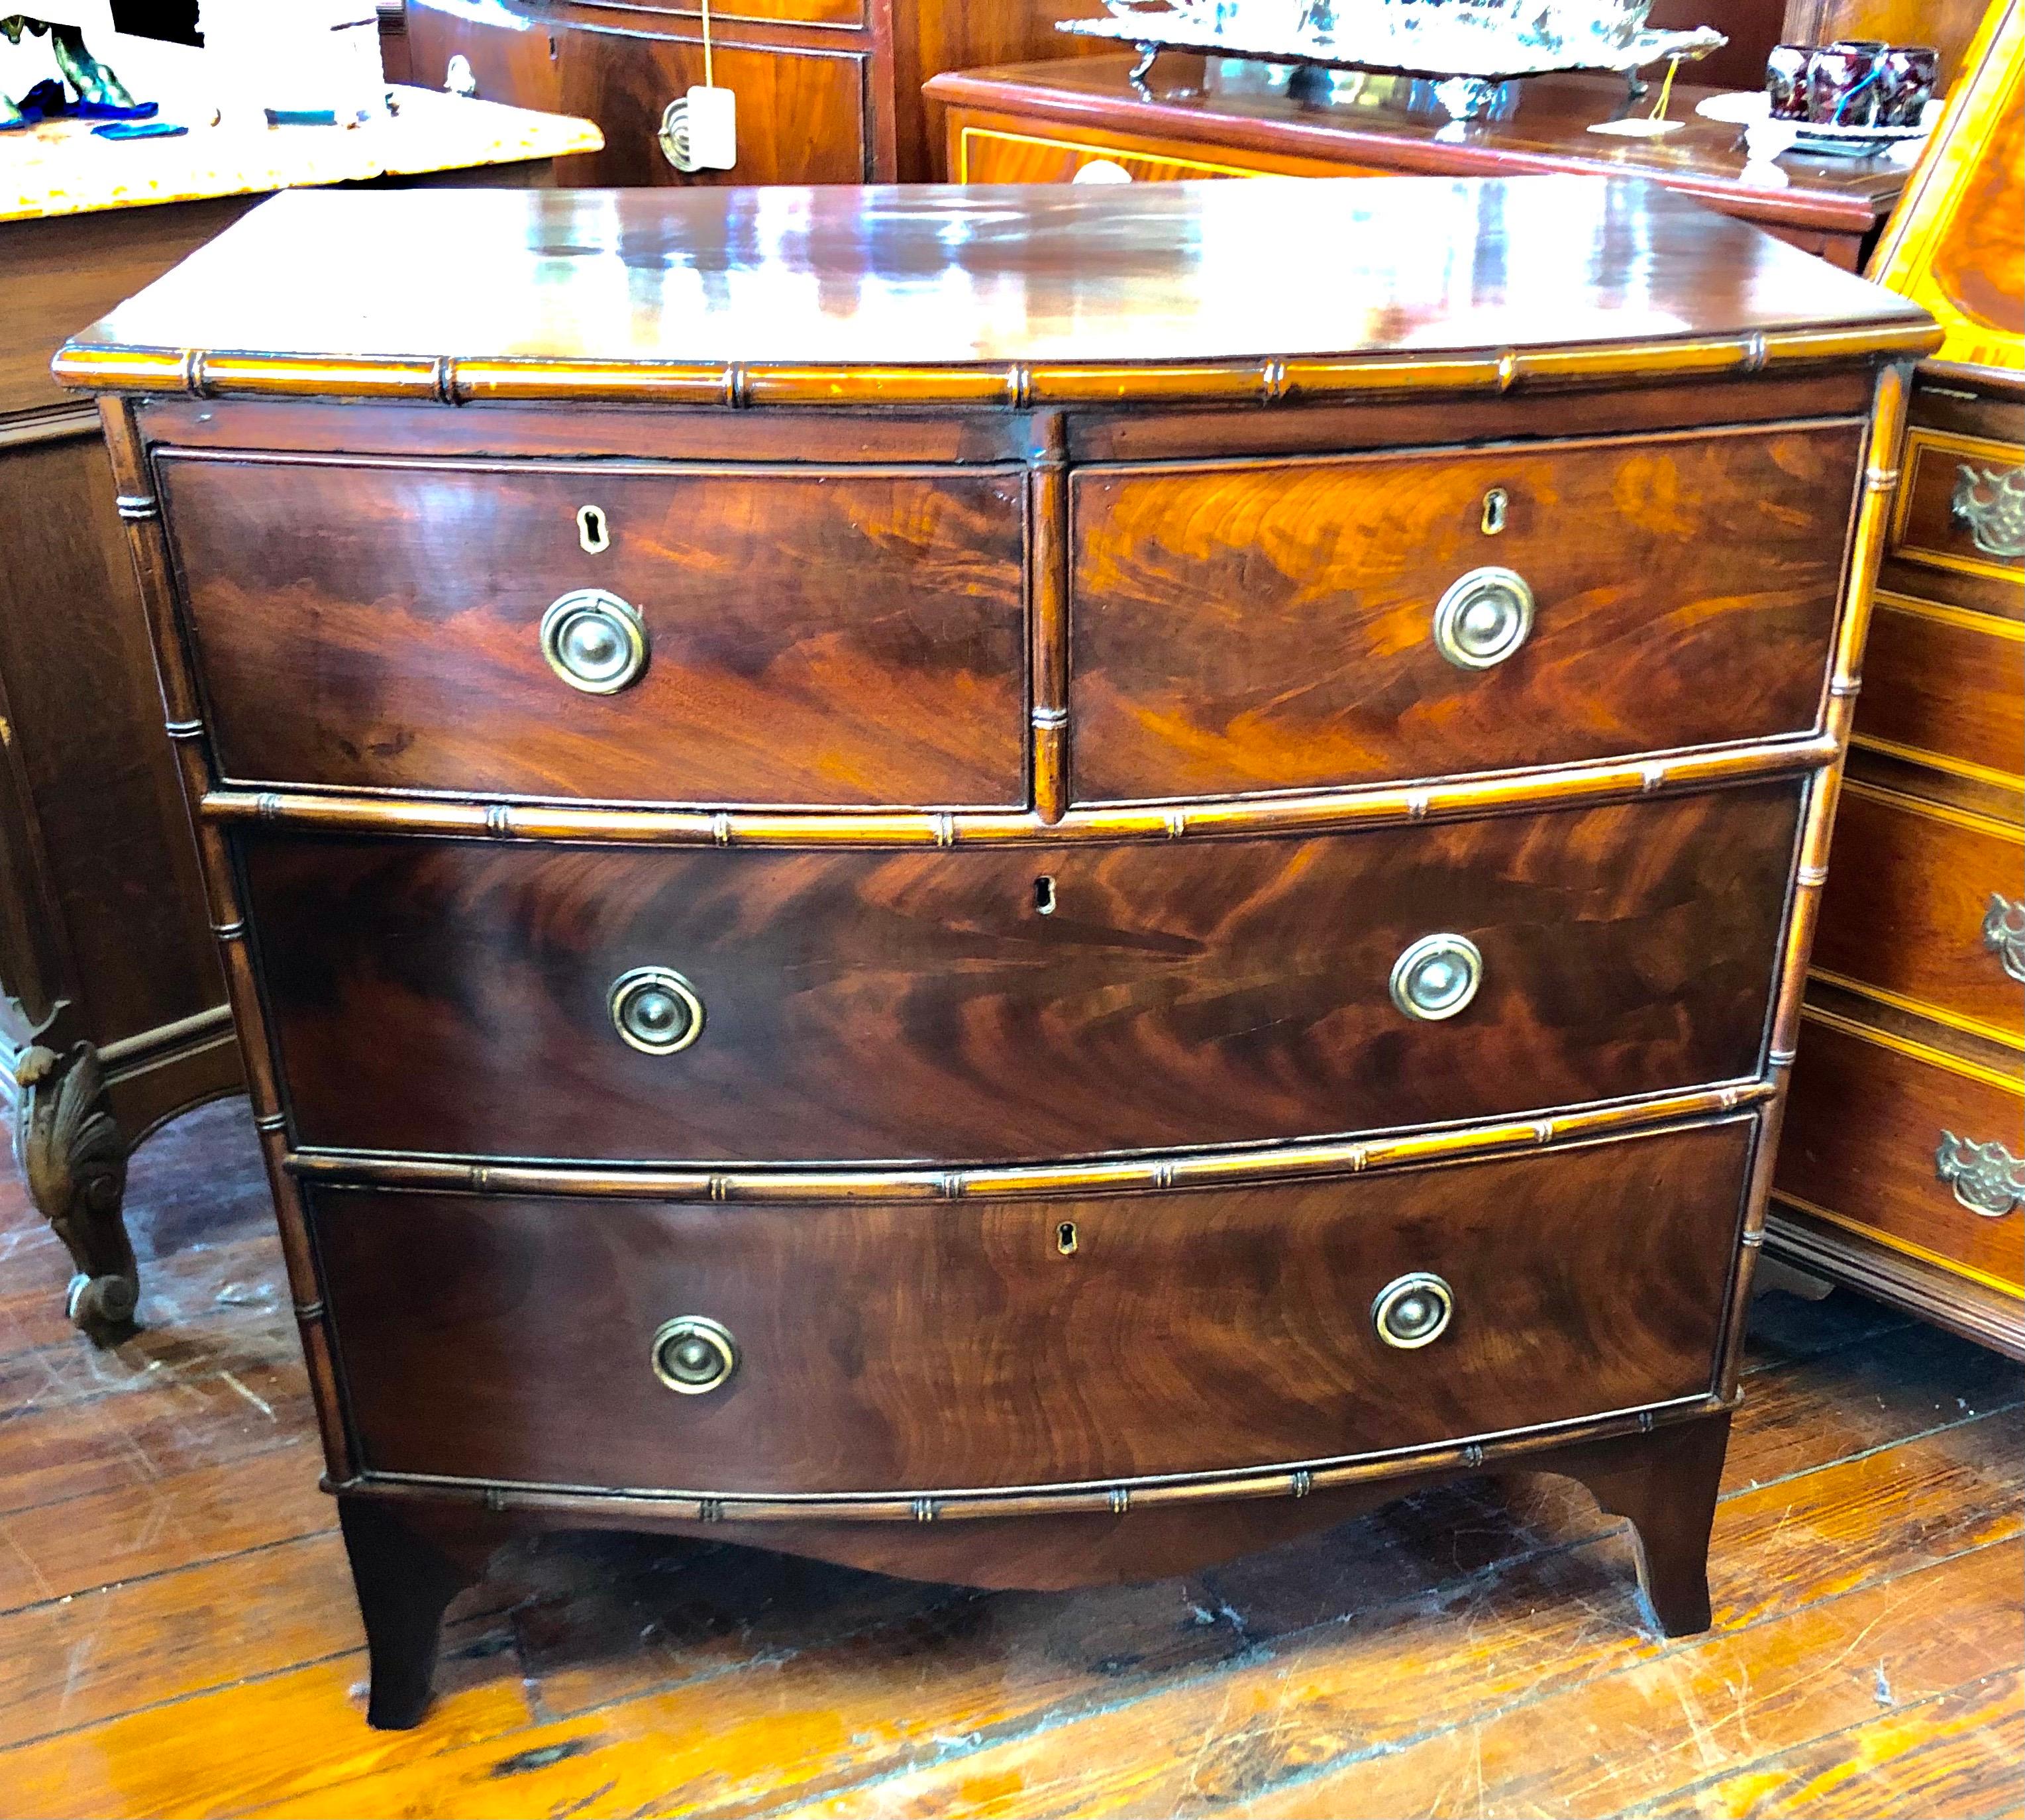 Wonderful antique English early 19th century English flame mahogany Regency style small bowfront Chest of Drawers with 